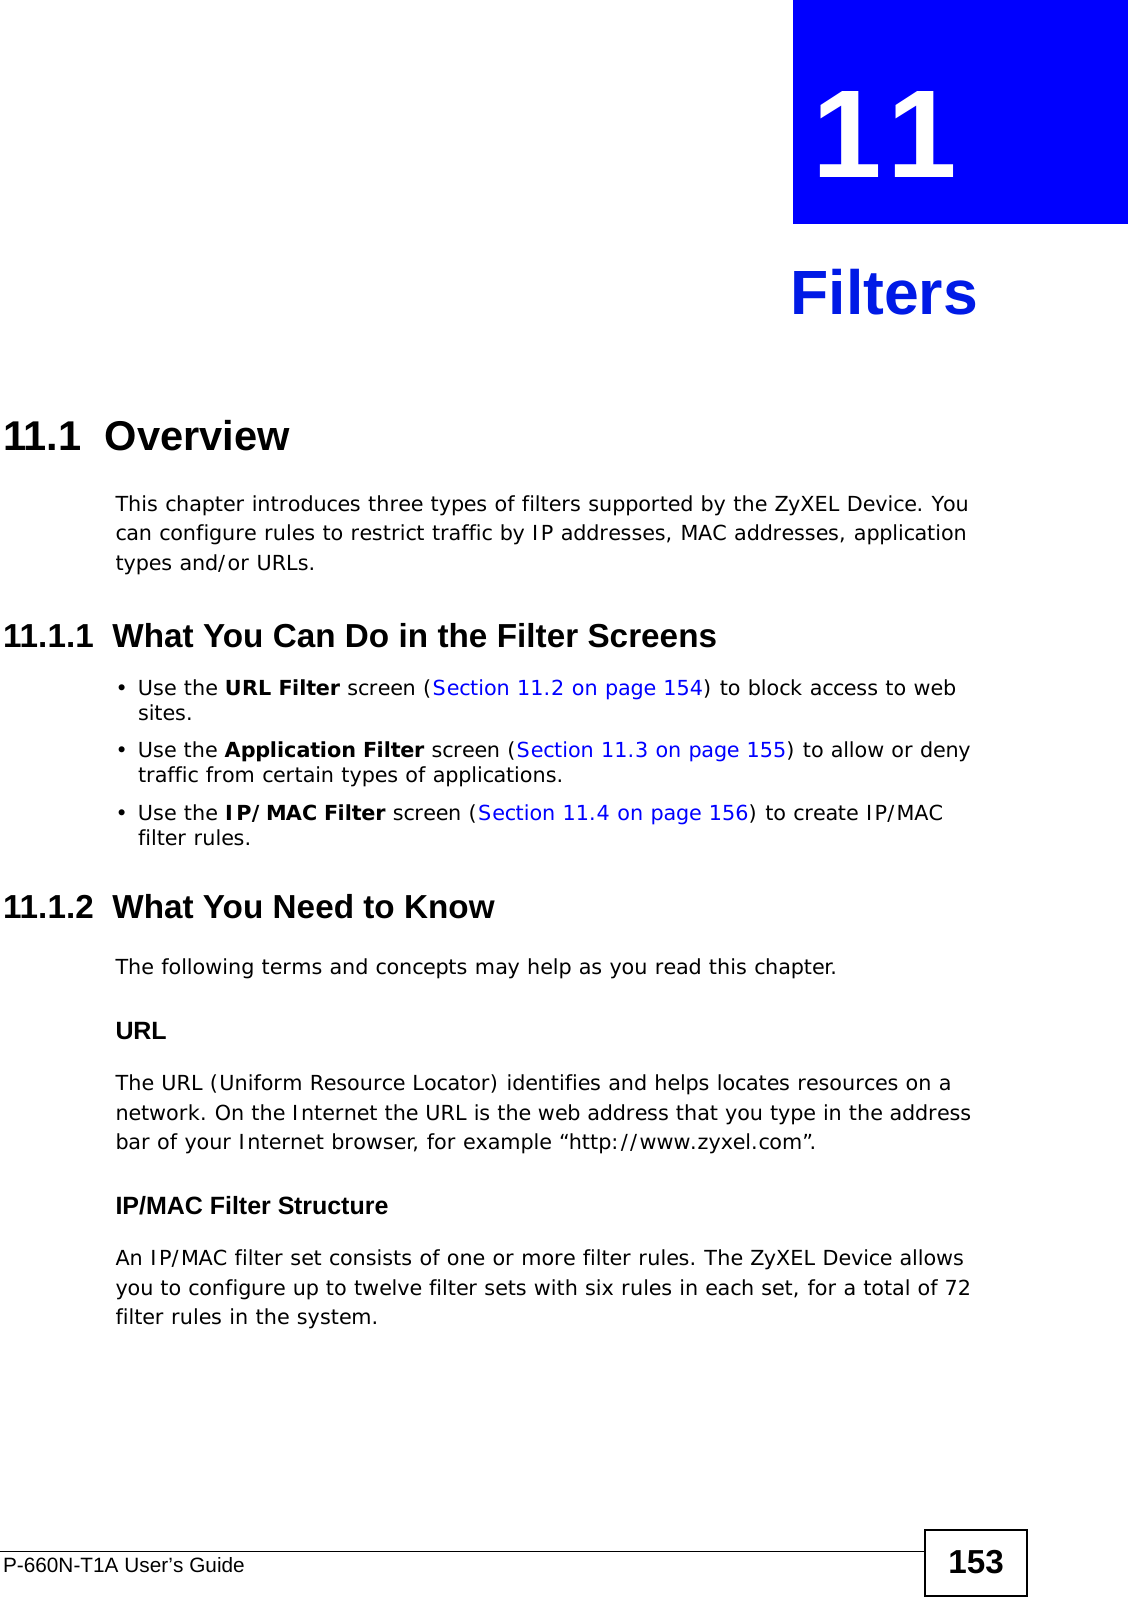 P-660N-T1A User’s Guide 153CHAPTER  11 Filters11.1  Overview This chapter introduces three types of filters supported by the ZyXEL Device. You can configure rules to restrict traffic by IP addresses, MAC addresses, application types and/or URLs.11.1.1  What You Can Do in the Filter Screens•Use the URL Filter screen (Section 11.2 on page 154) to block access to web sites.•Use the Application Filter screen (Section 11.3 on page 155) to allow or deny traffic from certain types of applications.•Use the IP/MAC Filter screen (Section 11.4 on page 156) to create IP/MAC filter rules.11.1.2  What You Need to KnowThe following terms and concepts may help as you read this chapter.URLThe URL (Uniform Resource Locator) identifies and helps locates resources on a network. On the Internet the URL is the web address that you type in the address bar of your Internet browser, for example “http://www.zyxel.com”.IP/MAC Filter StructureAn IP/MAC filter set consists of one or more filter rules. The ZyXEL Device allows you to configure up to twelve filter sets with six rules in each set, for a total of 72 filter rules in the system.